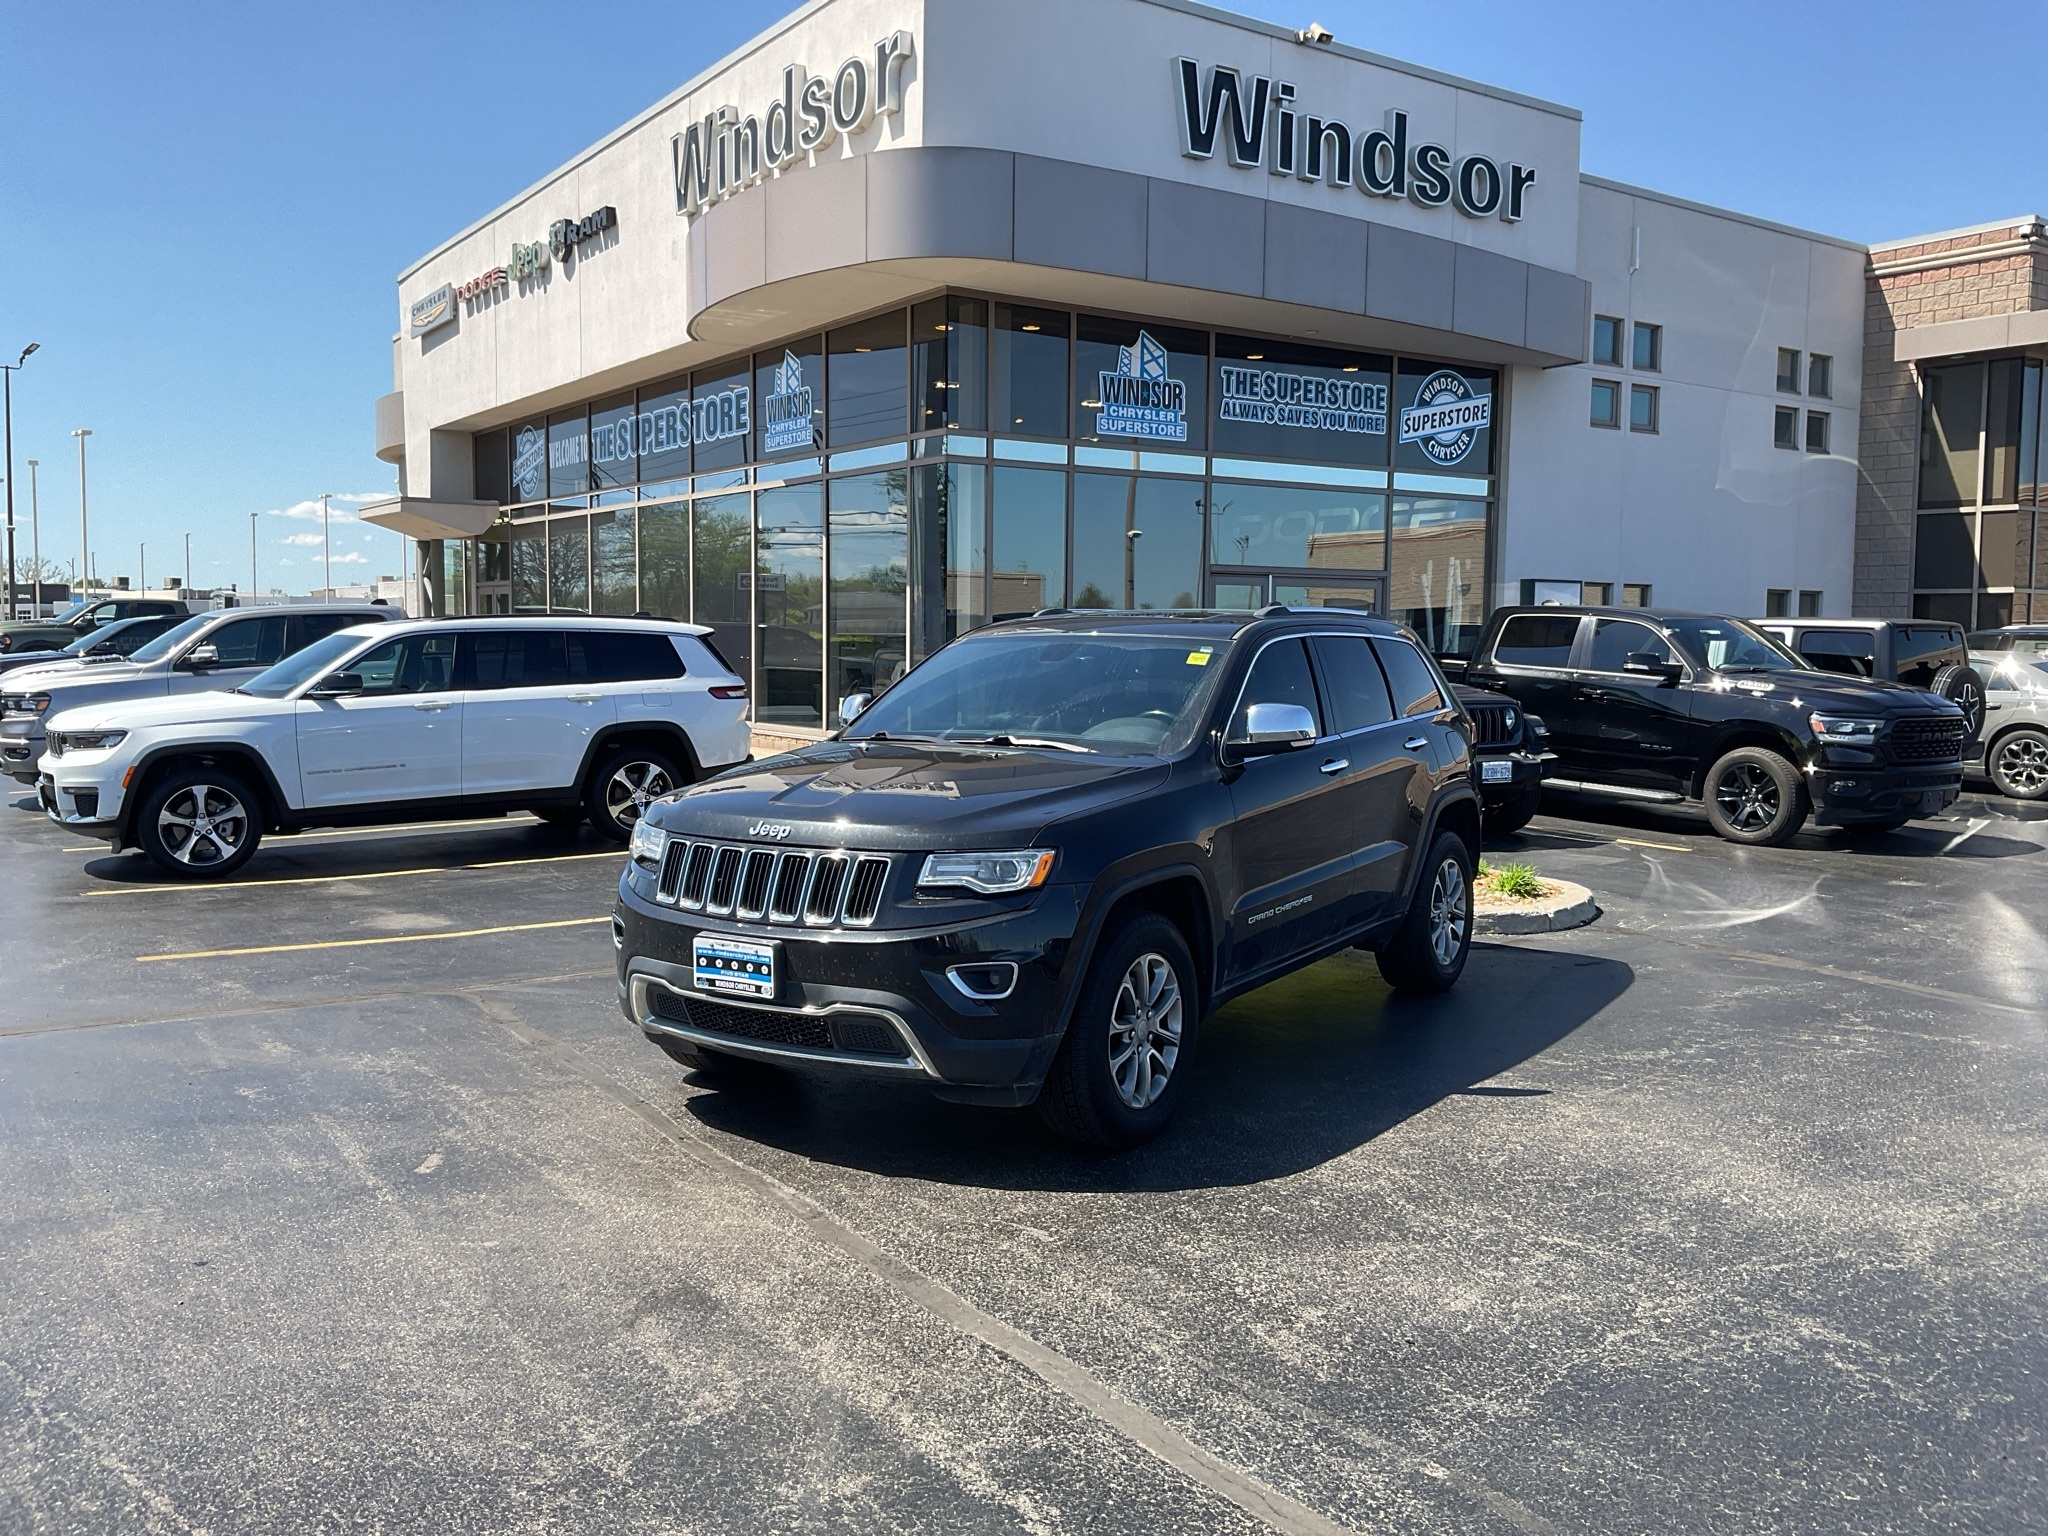 2015 Jeep Grand Cherokee LIMITED